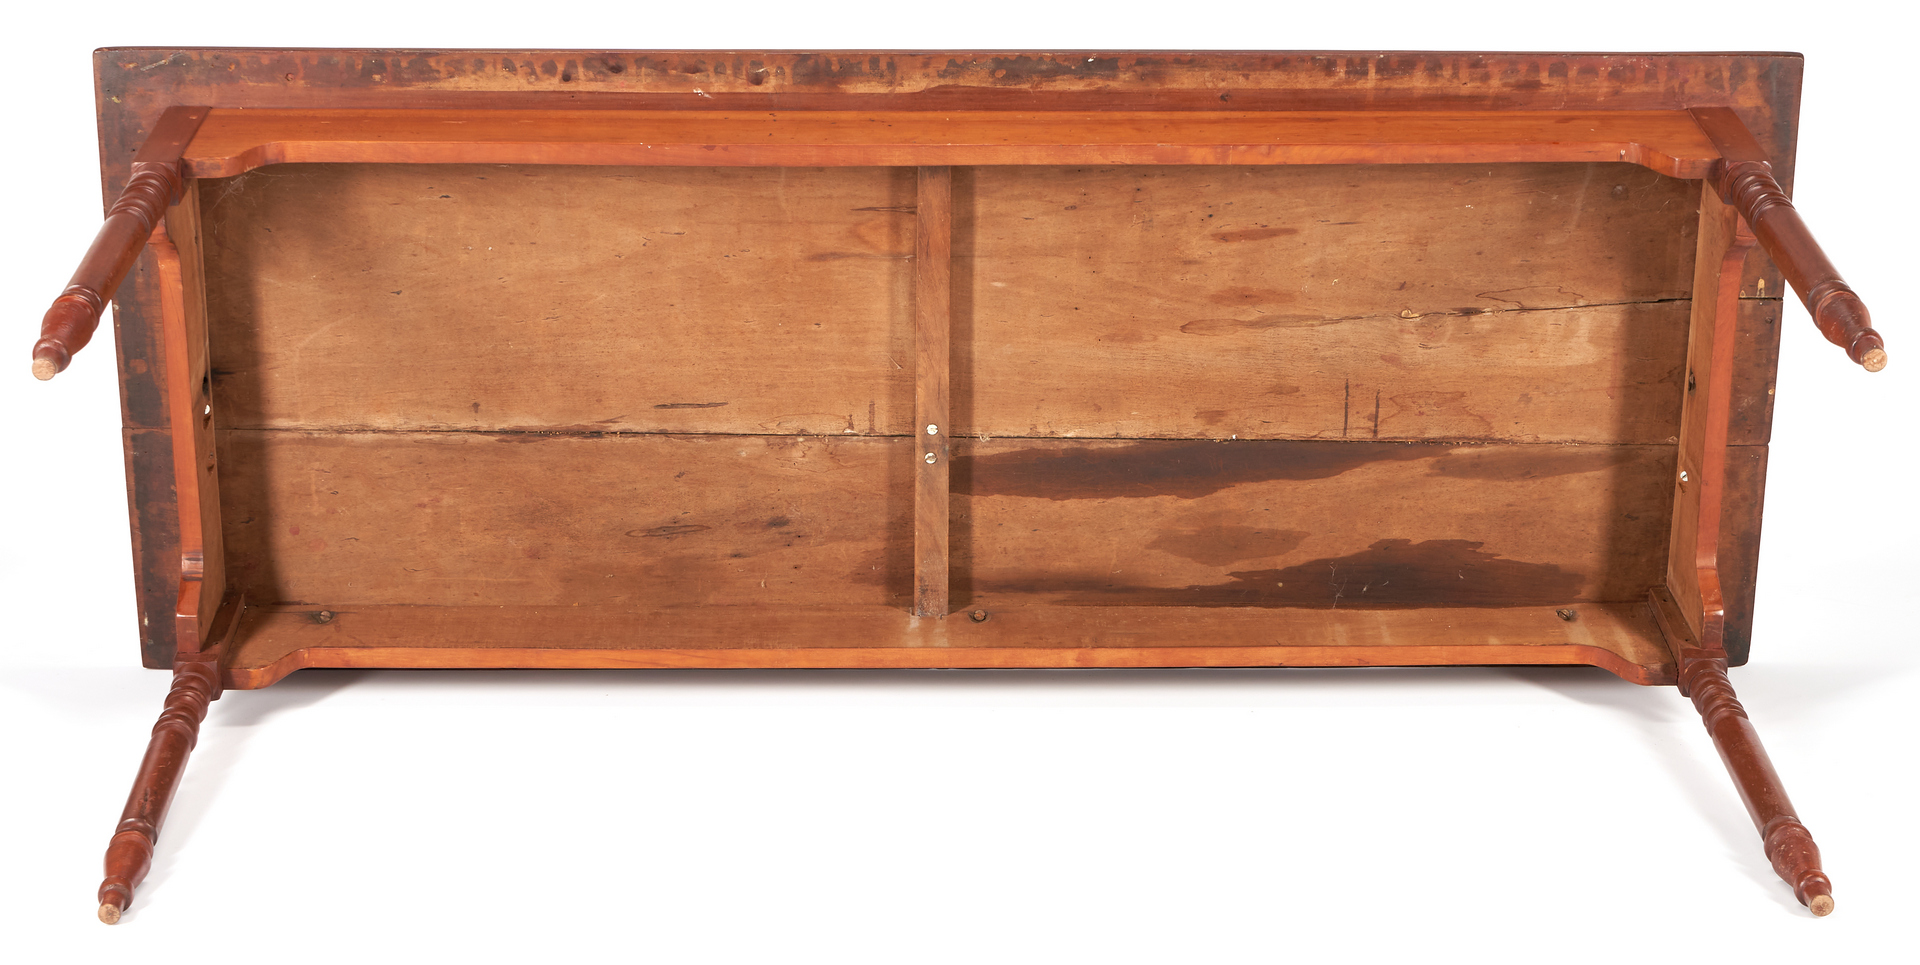 Lot 255: Southern Cherry Harvest Table